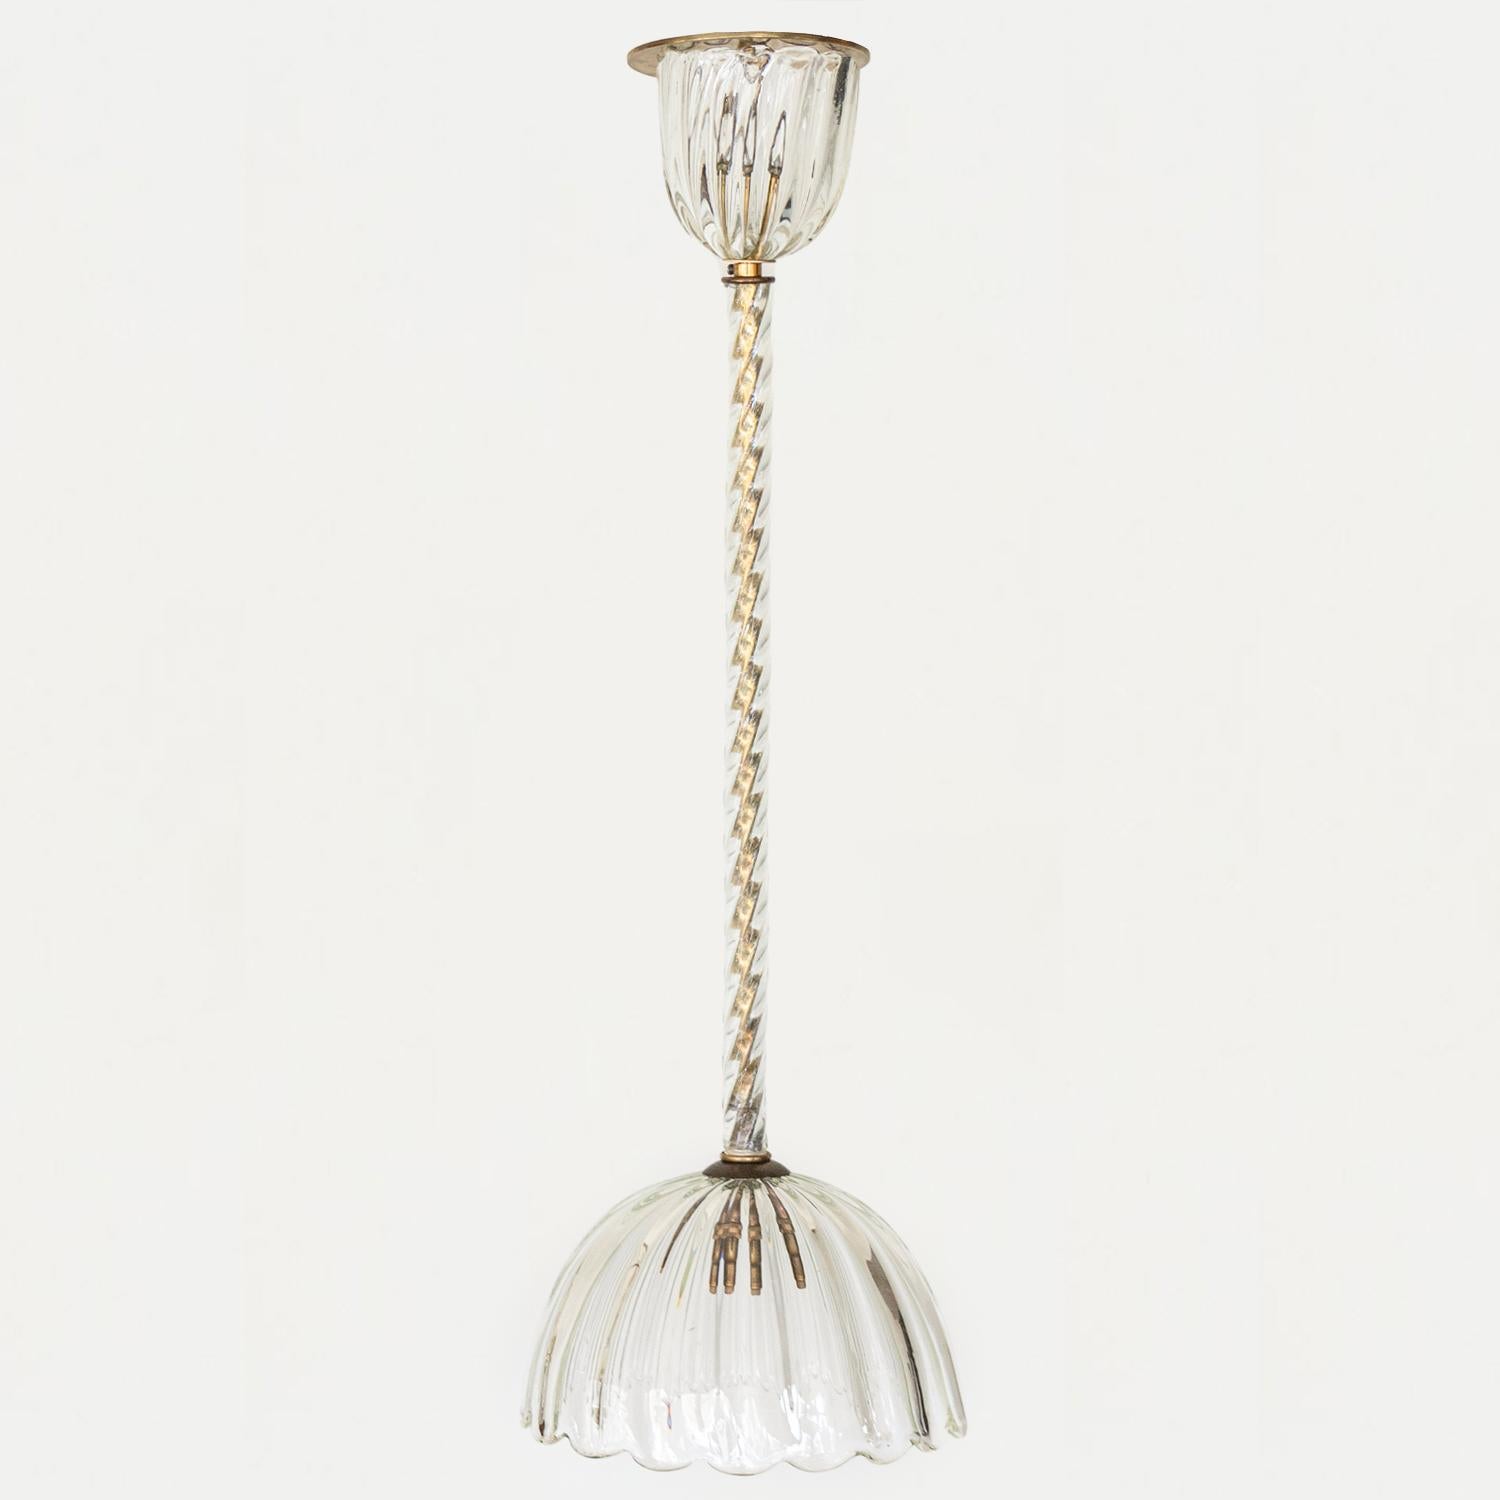 Lovely Italian glass pendant light with blown Murano glass dome shade with wavy scalloped edge. Beautiful twisted glass stem. Newly wired and newly added brass plate.

Overall height is 25